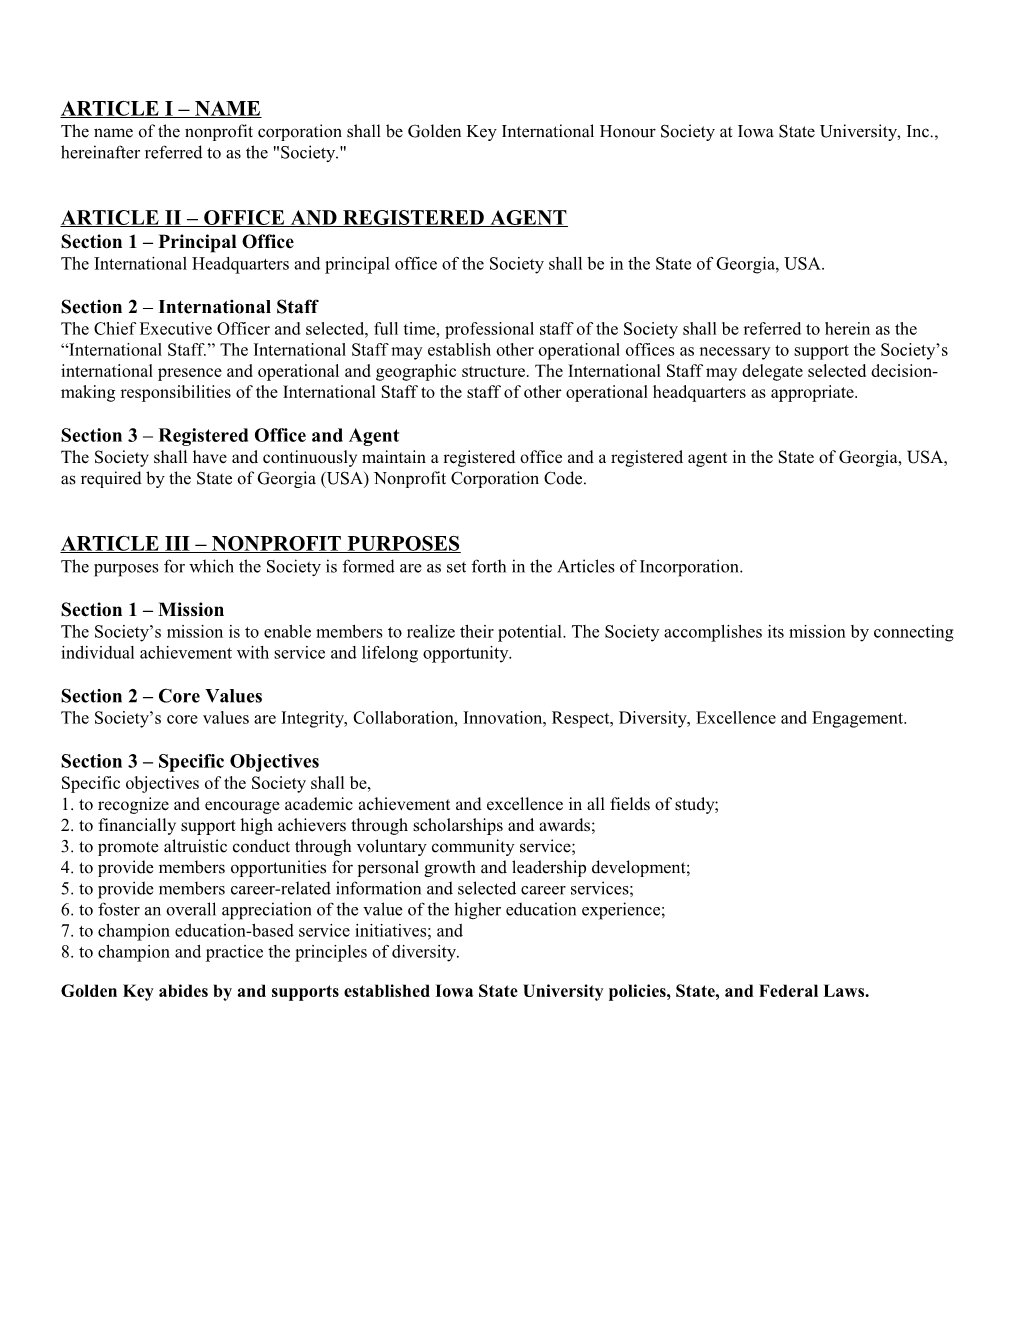 Article Ii Office and Registered Agent